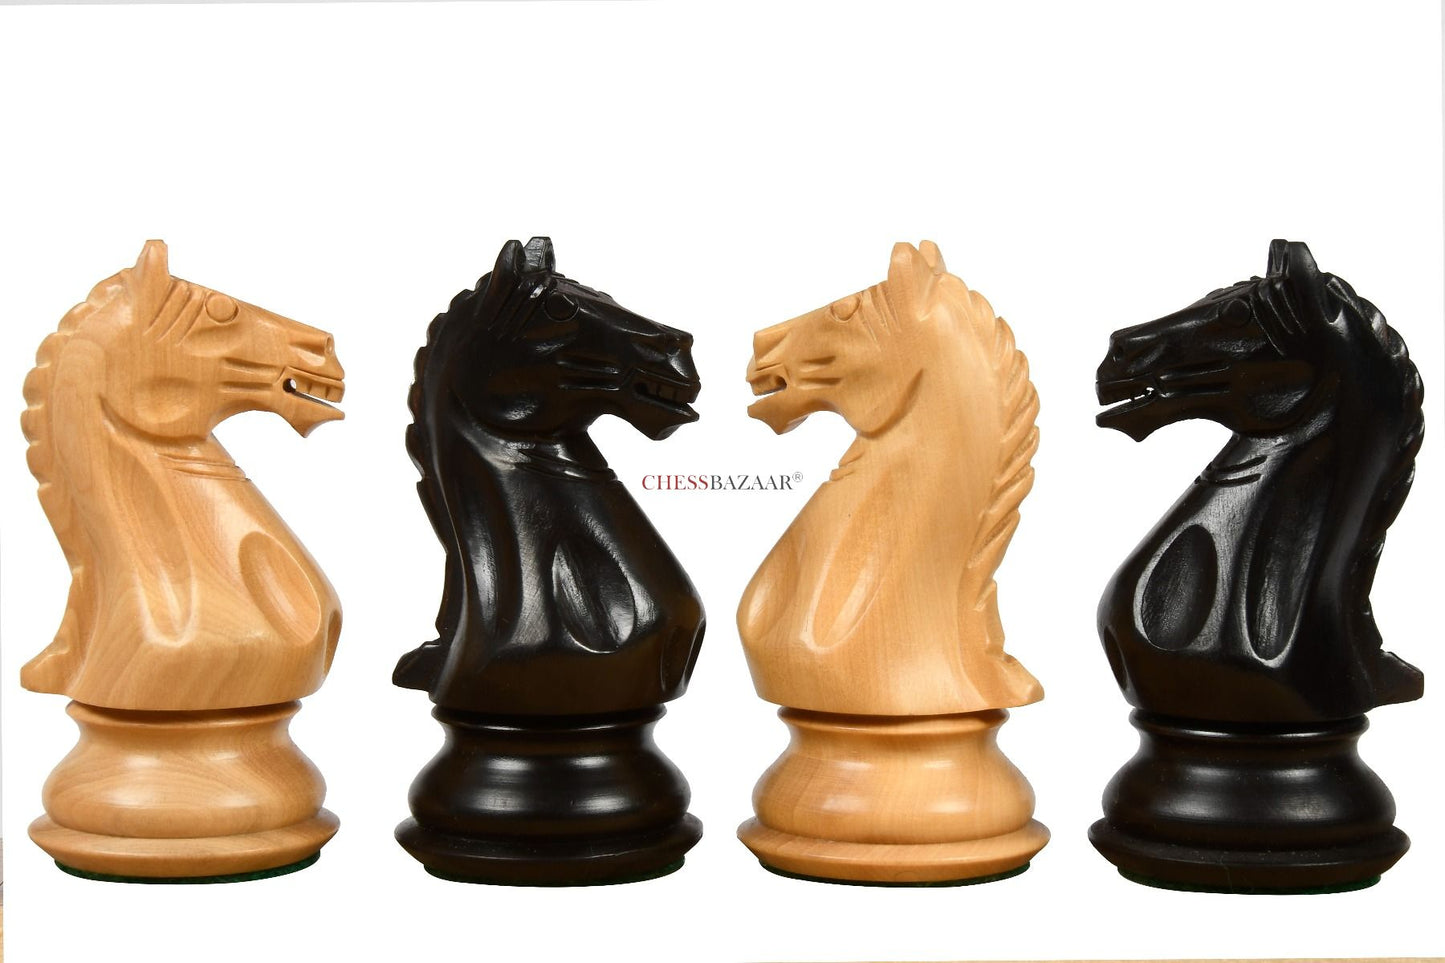 Combo of The Fierce Knight Staunton Wooden Chess Pieces in Ebonized Boxwood & Box Wood - 4.0" King with Storage Box and Wooden Chess Board - 21"